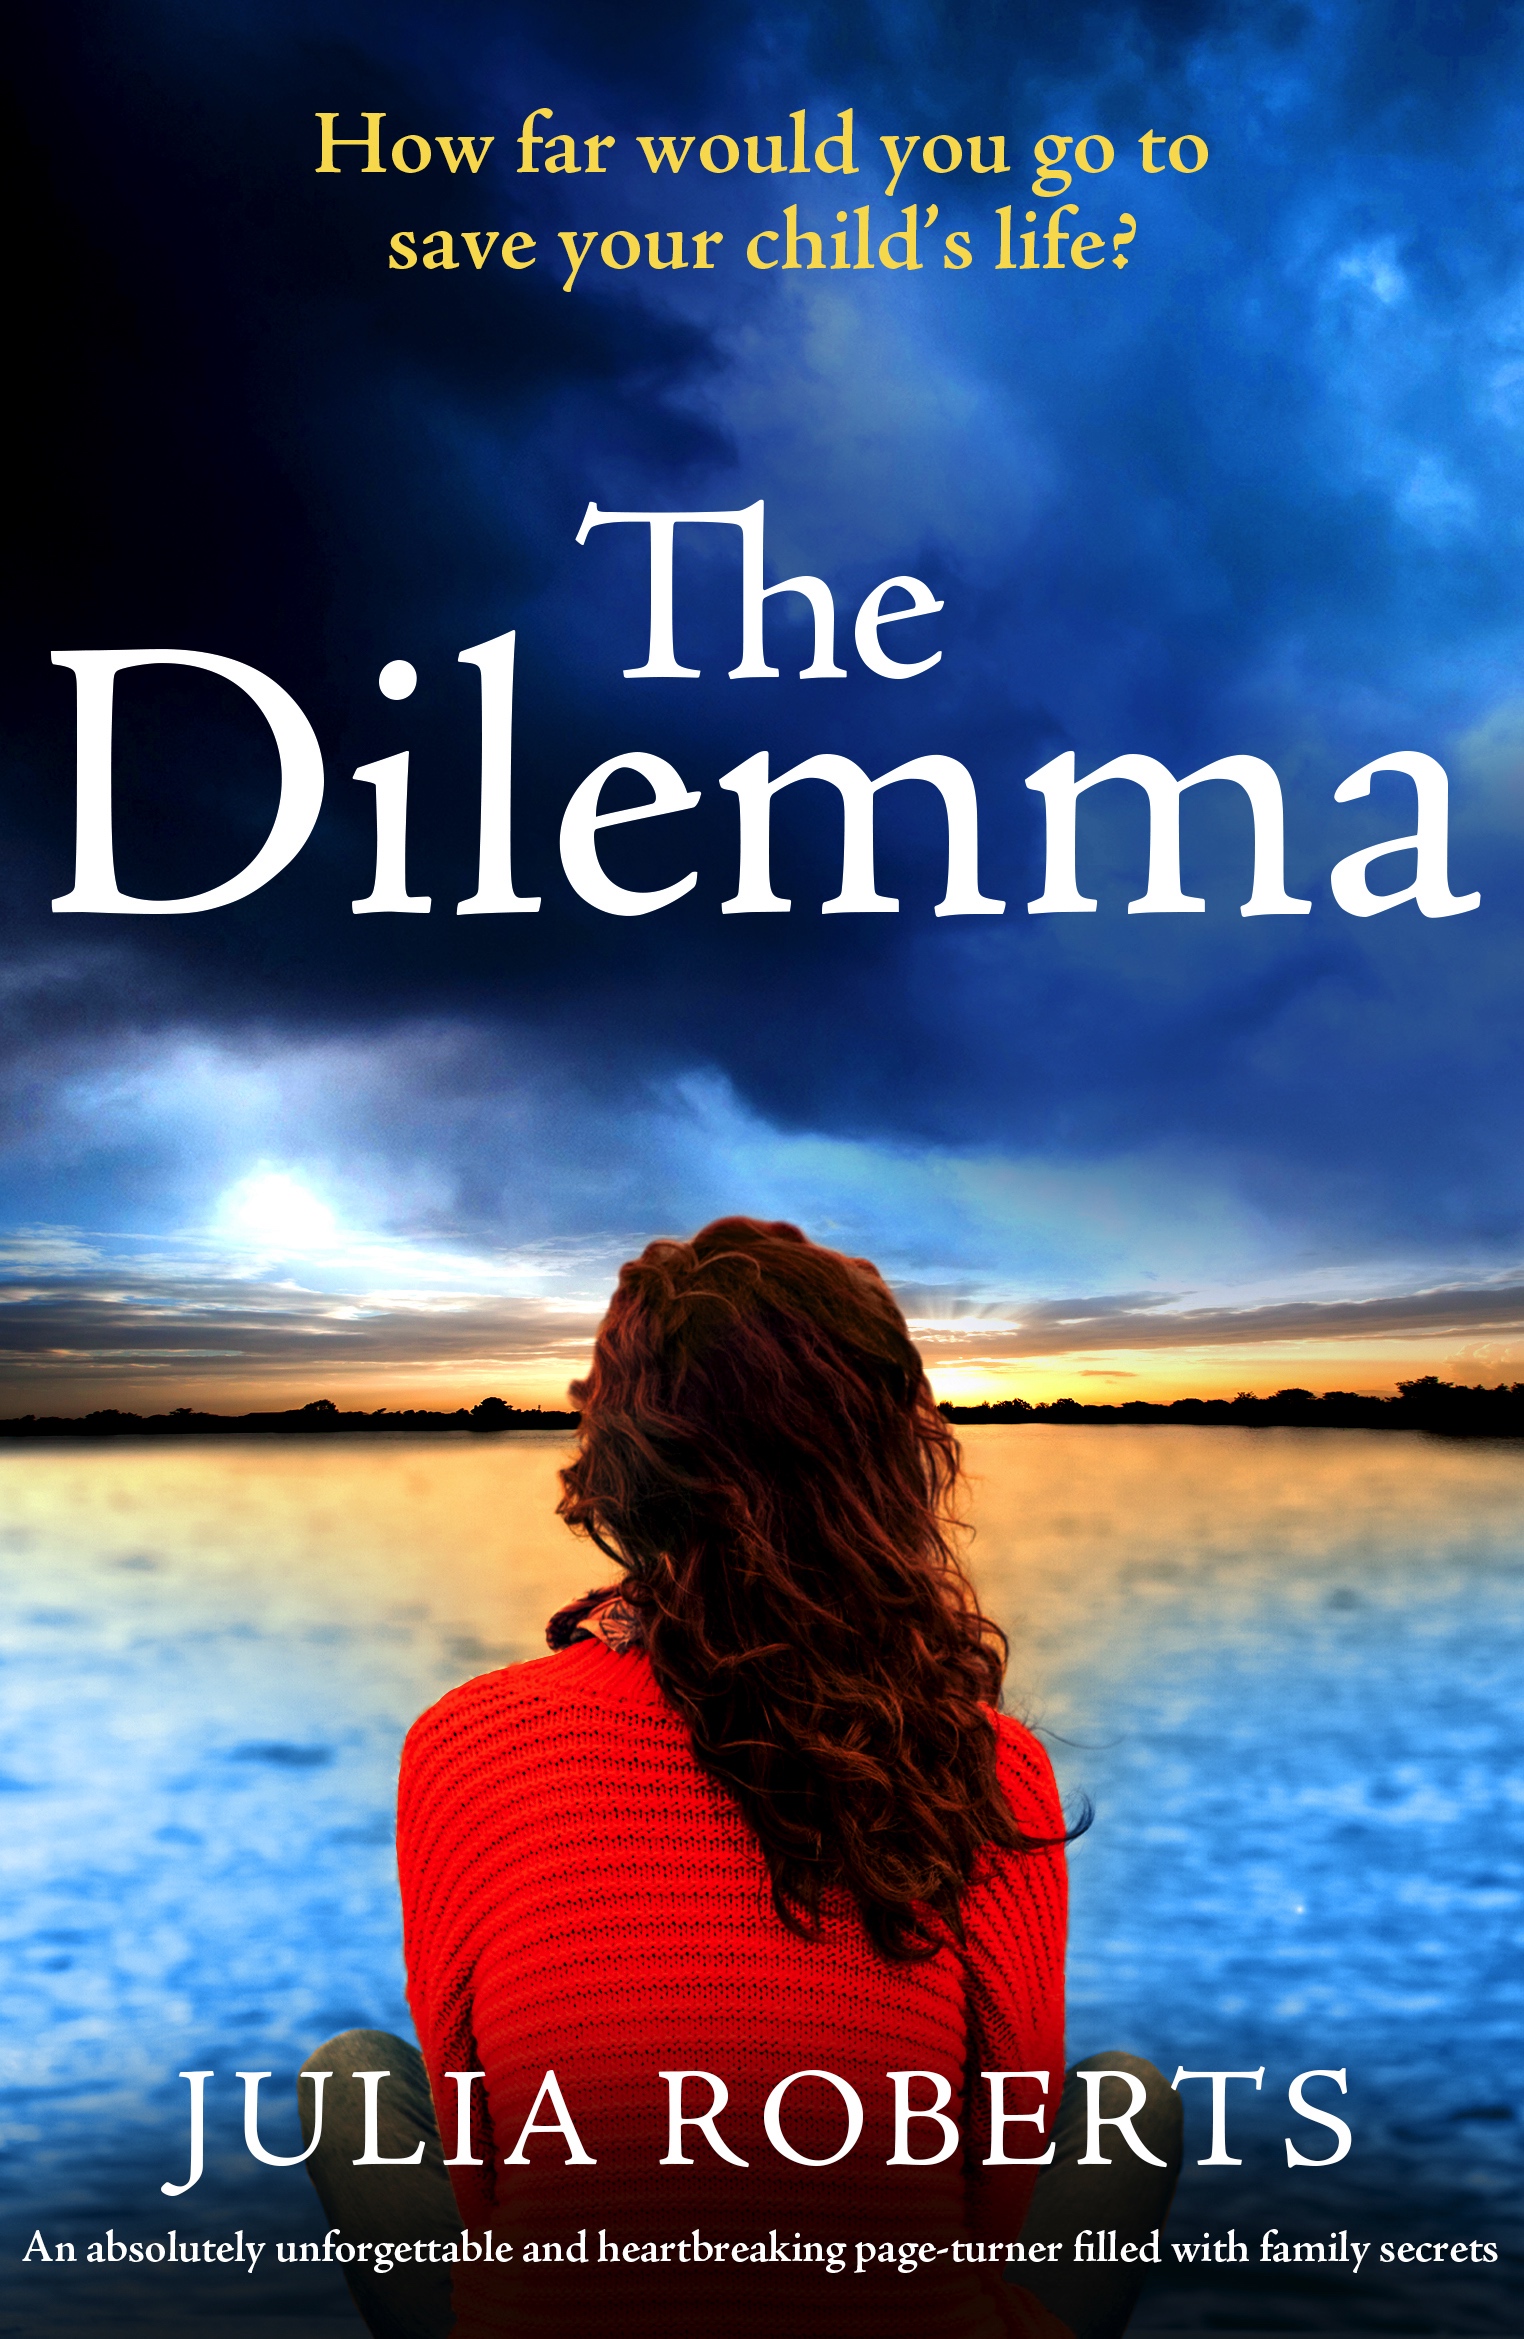 The Dilemma book cover